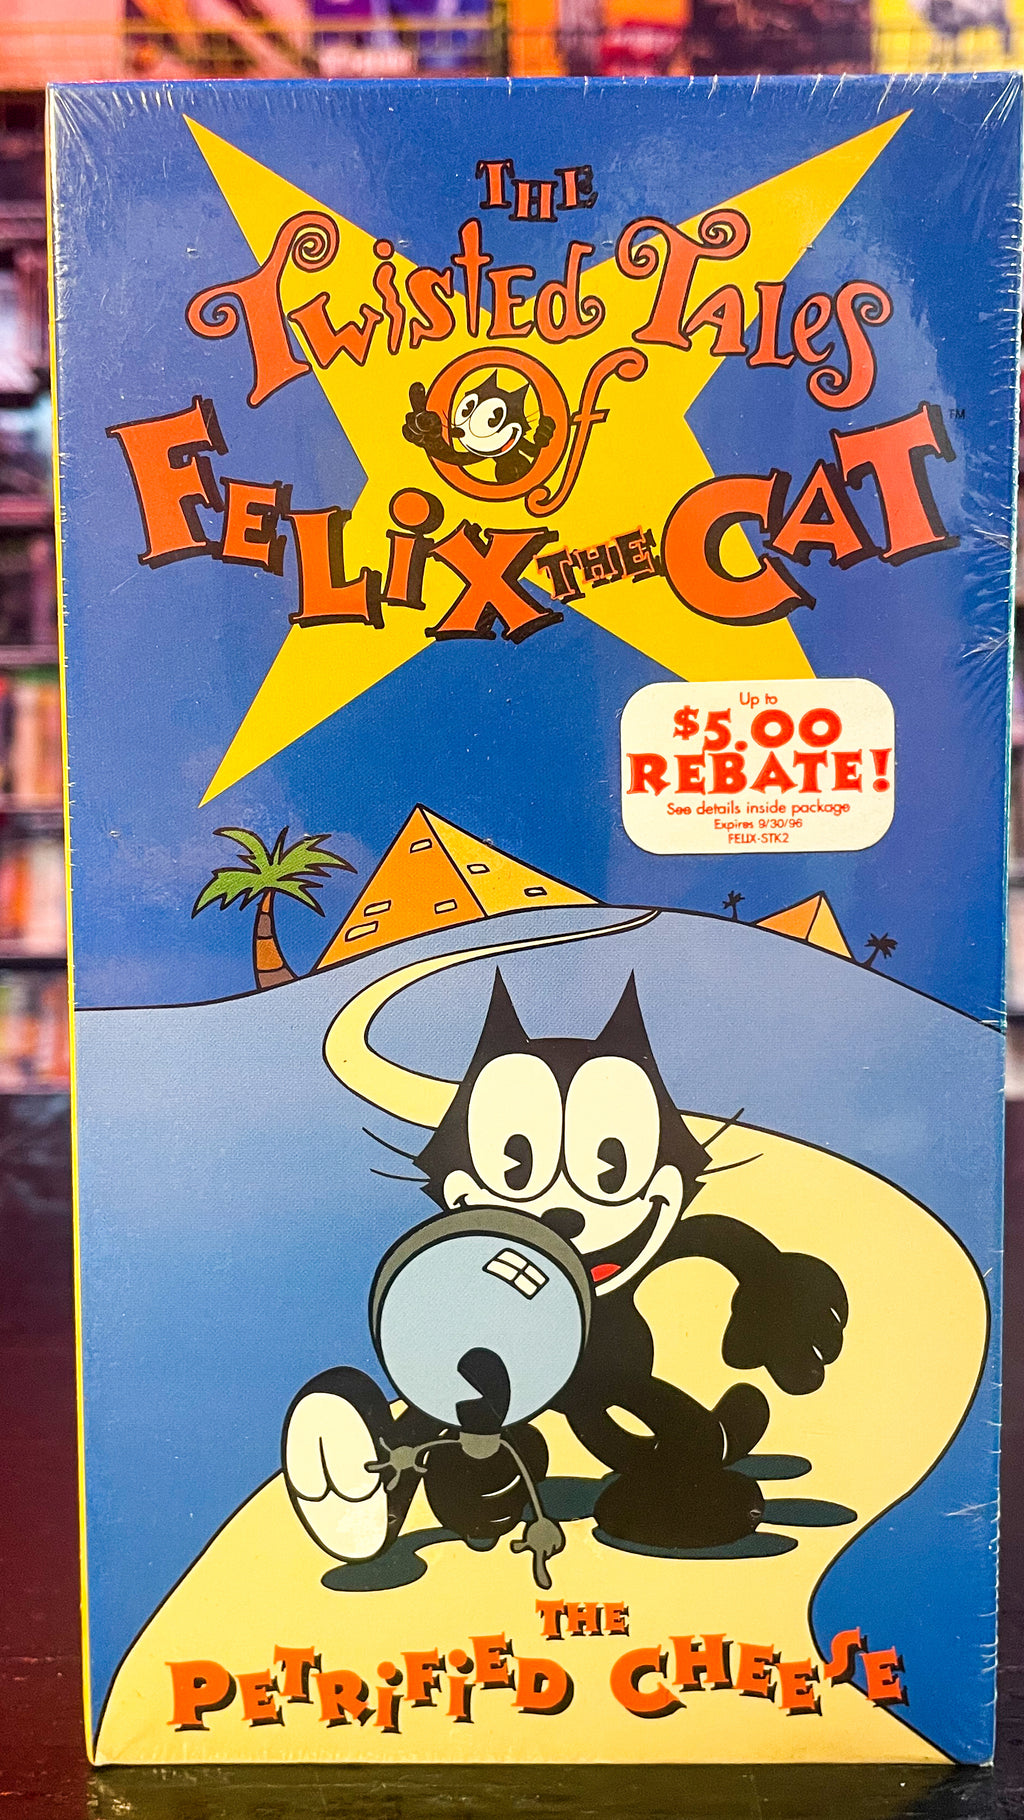 The Twisted Tales of Felix the Cat: The Petrified Cheese